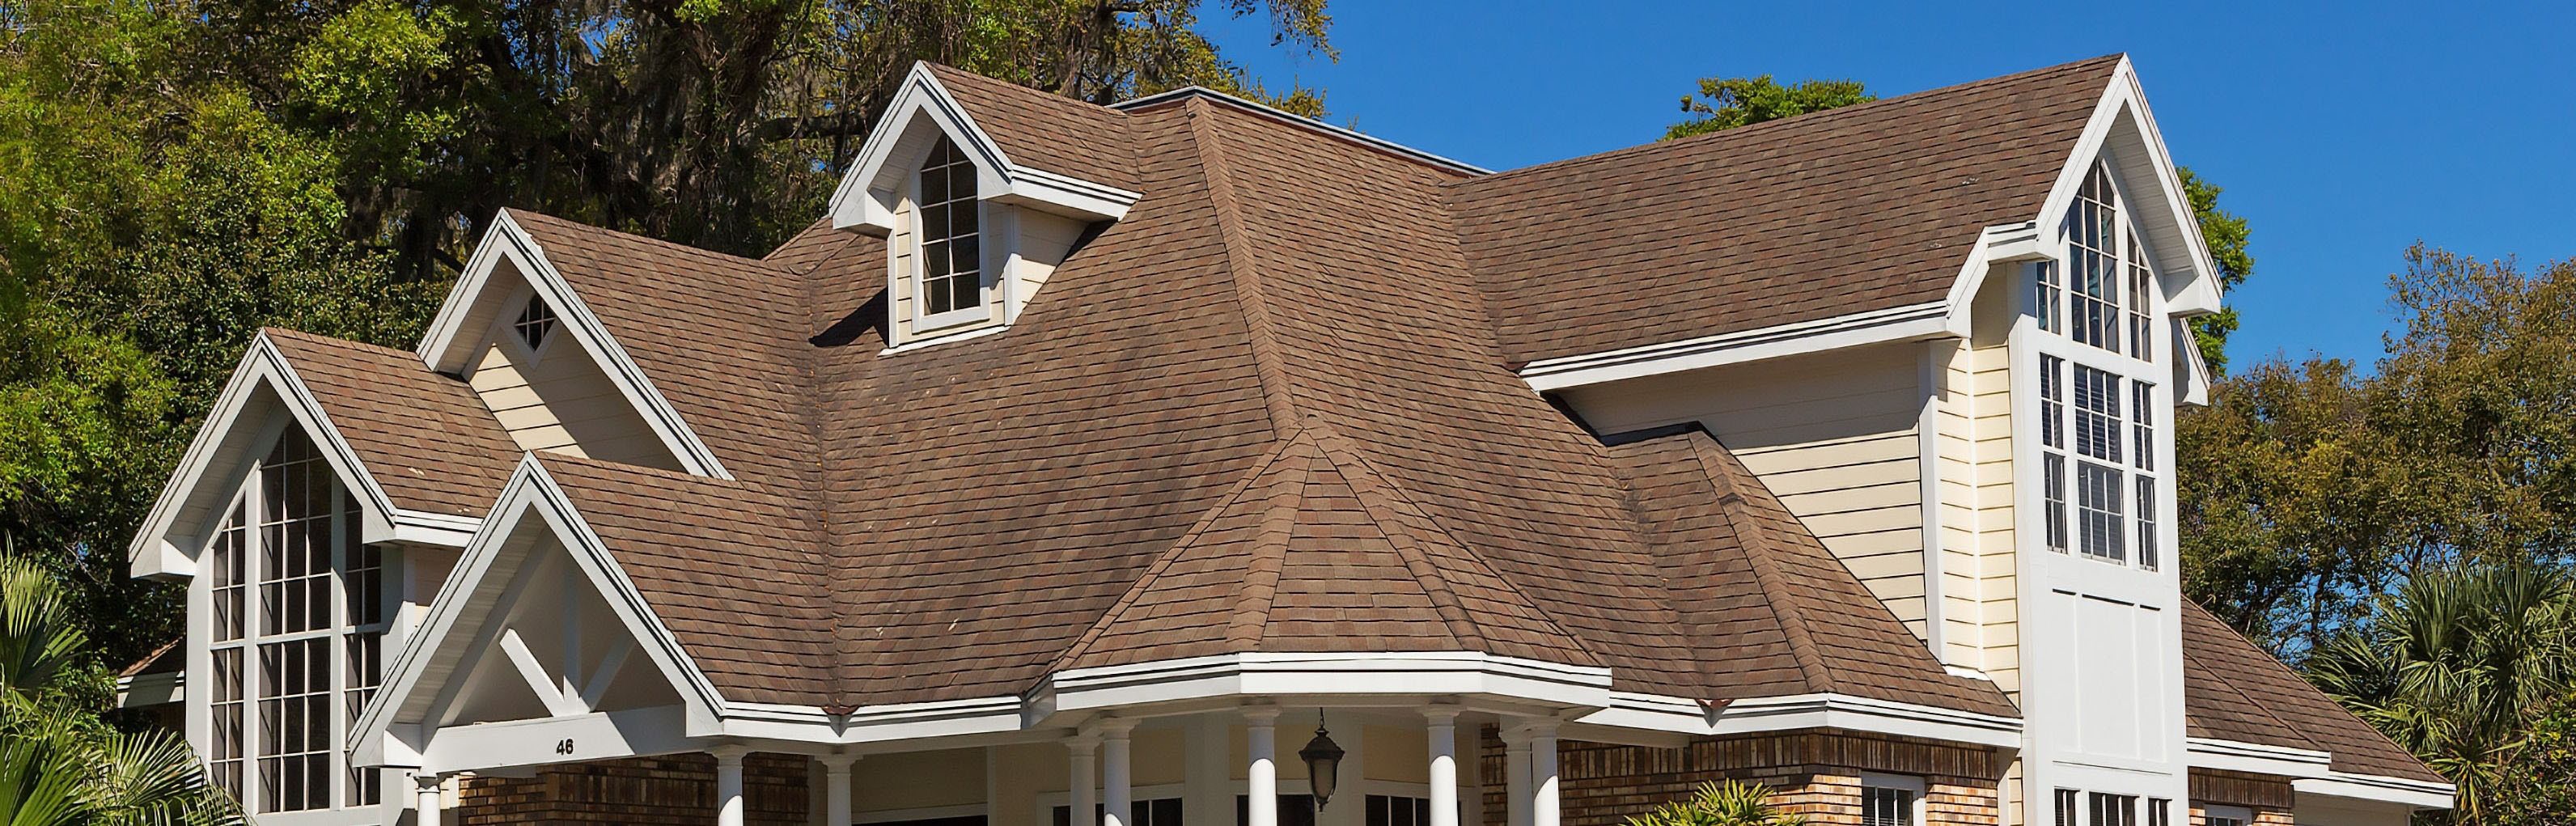 Egg Harbor Township Roofing Contractor